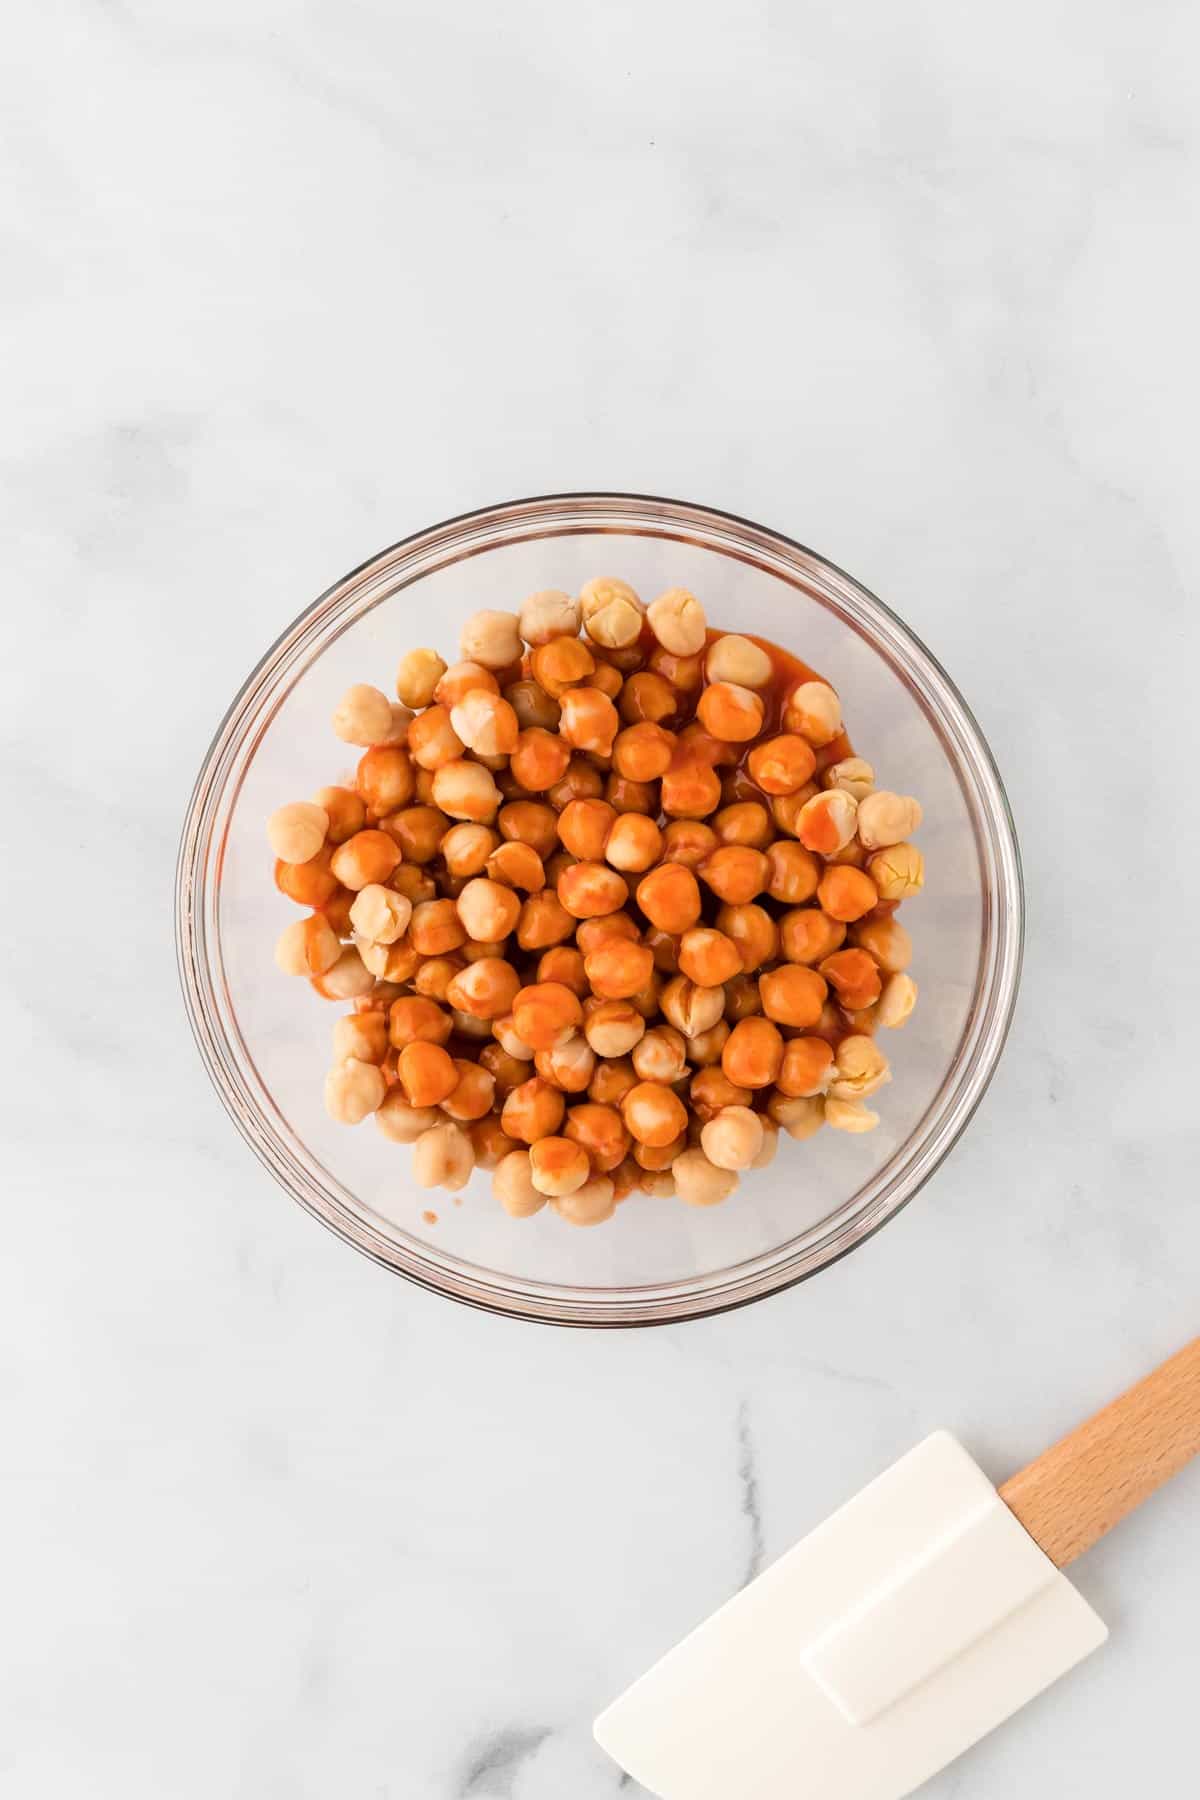 A picture of chickpeas with buffalo sauce on them in a glass bowl.